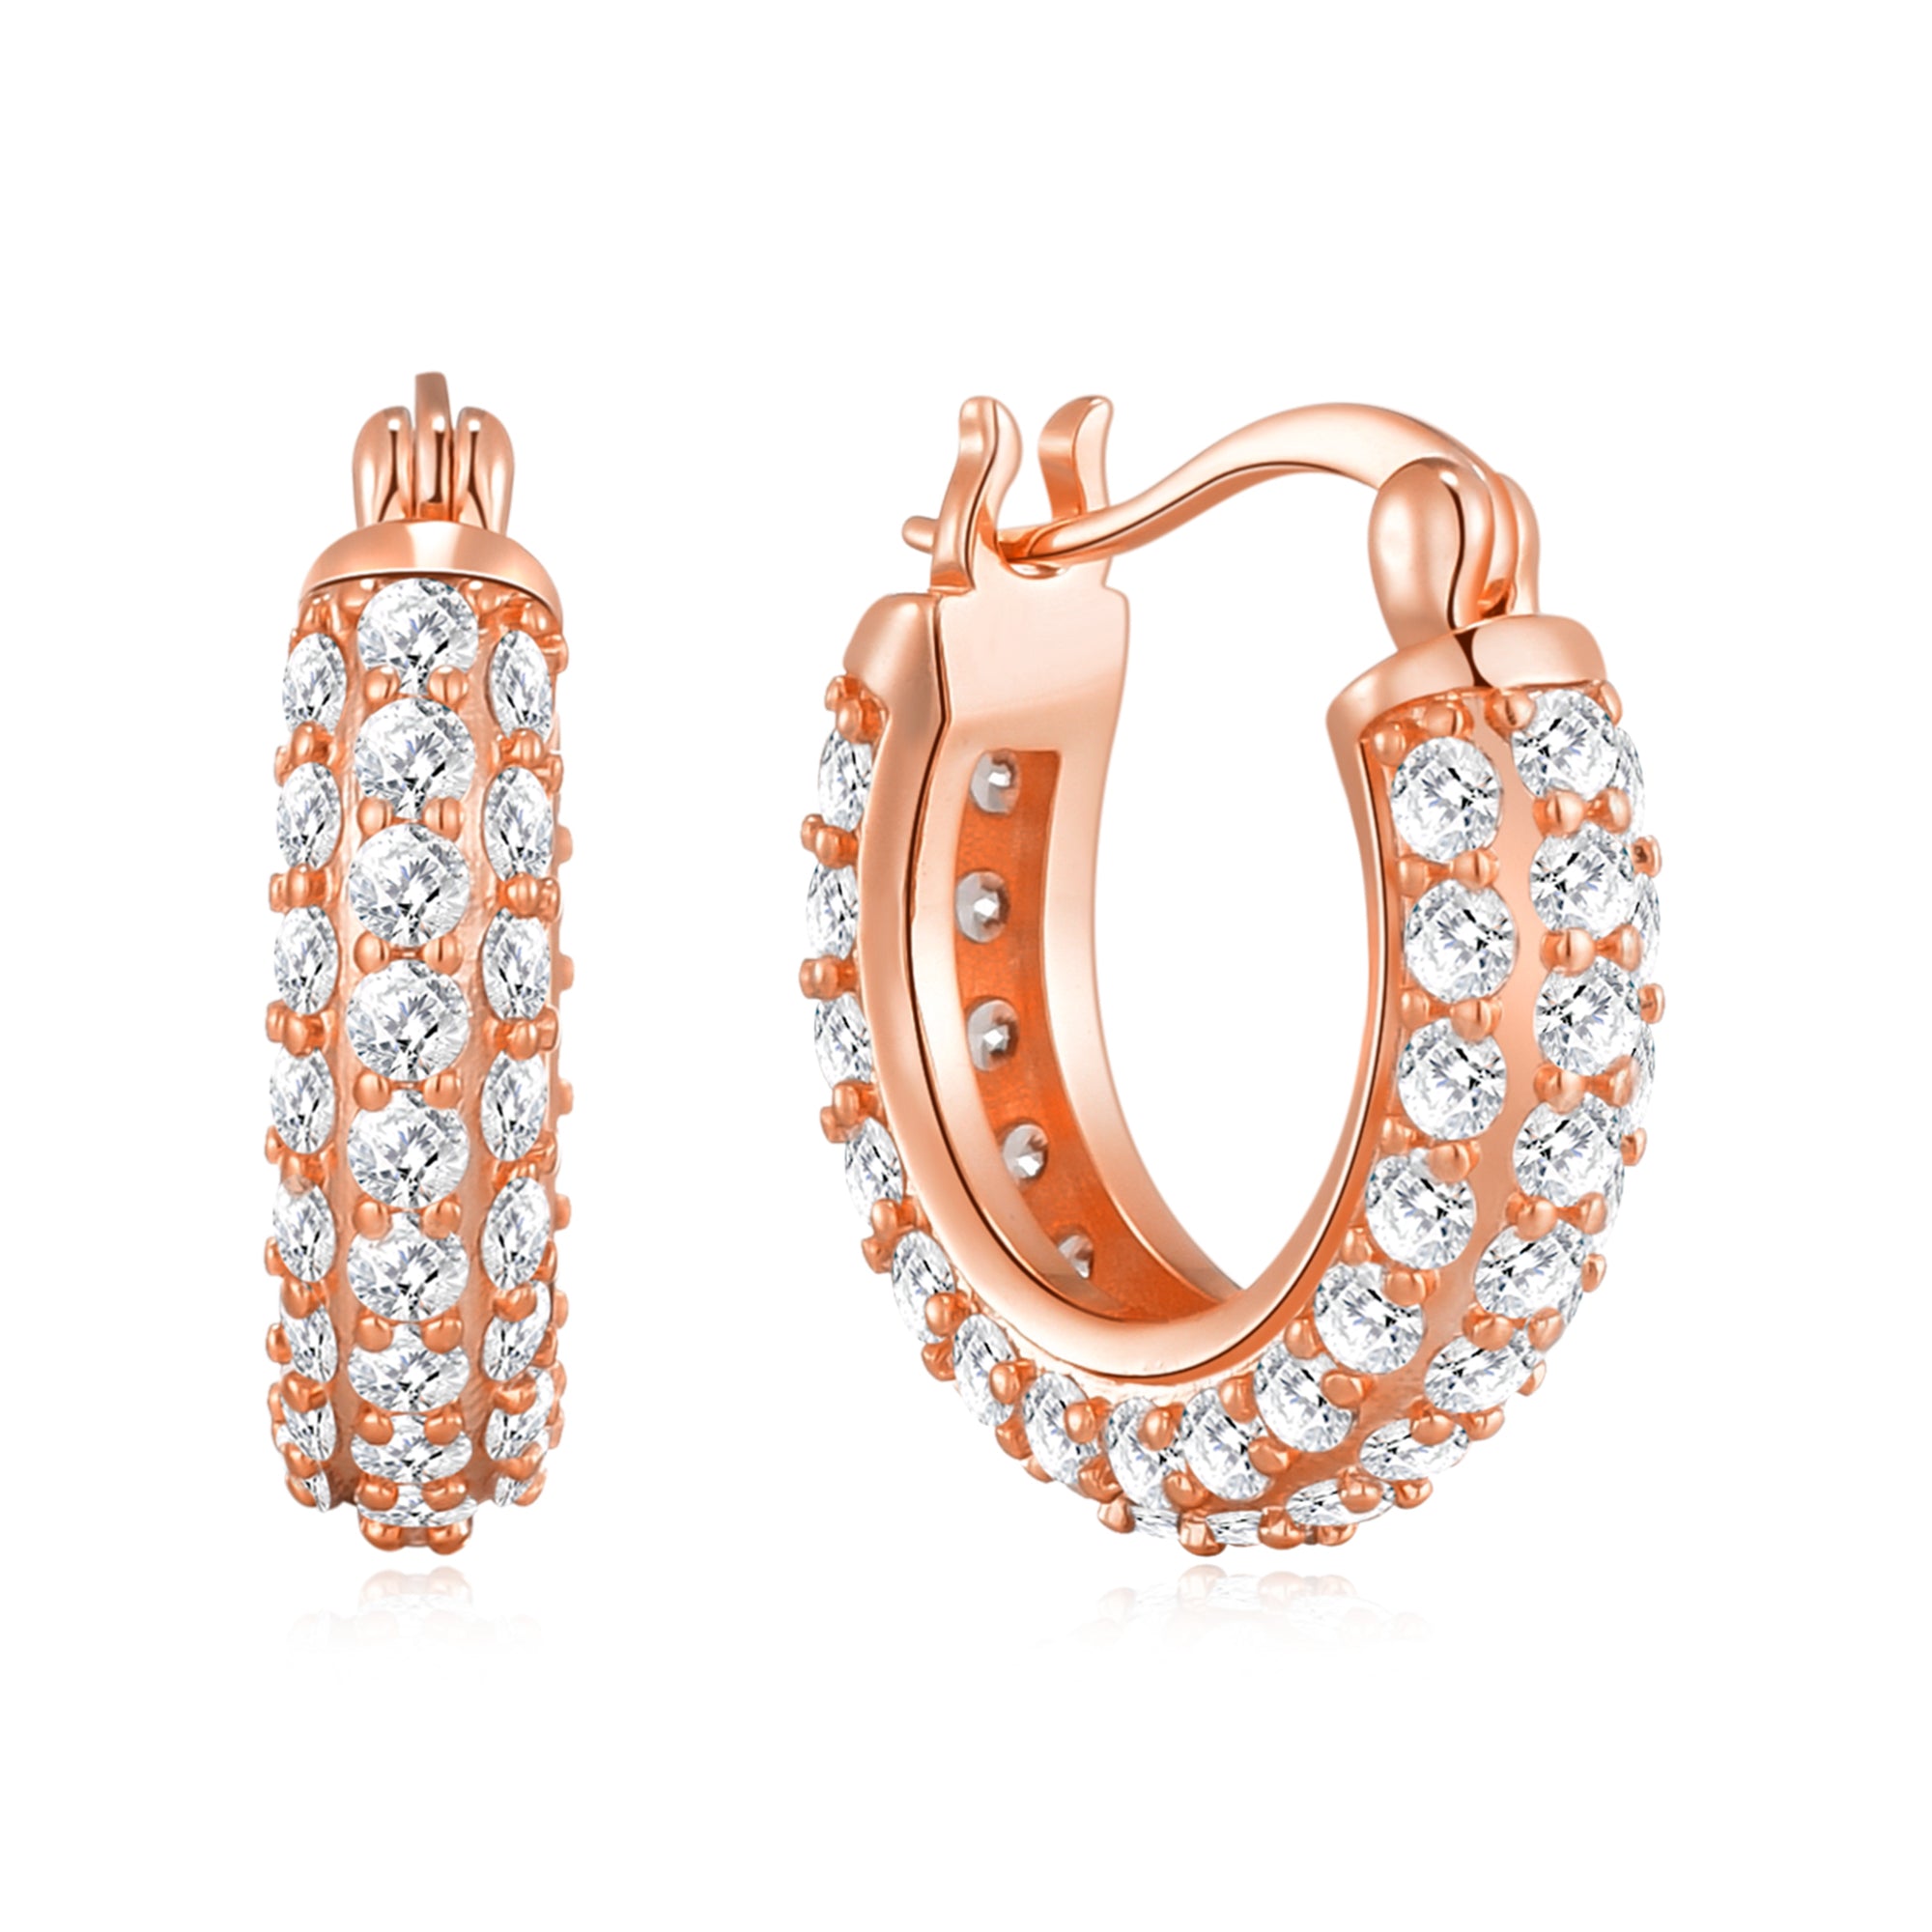 Rose Gold Plated 20mm Pave Hoop Earrings Created with Zircondia® Crystals by Philip Jones Jewellery